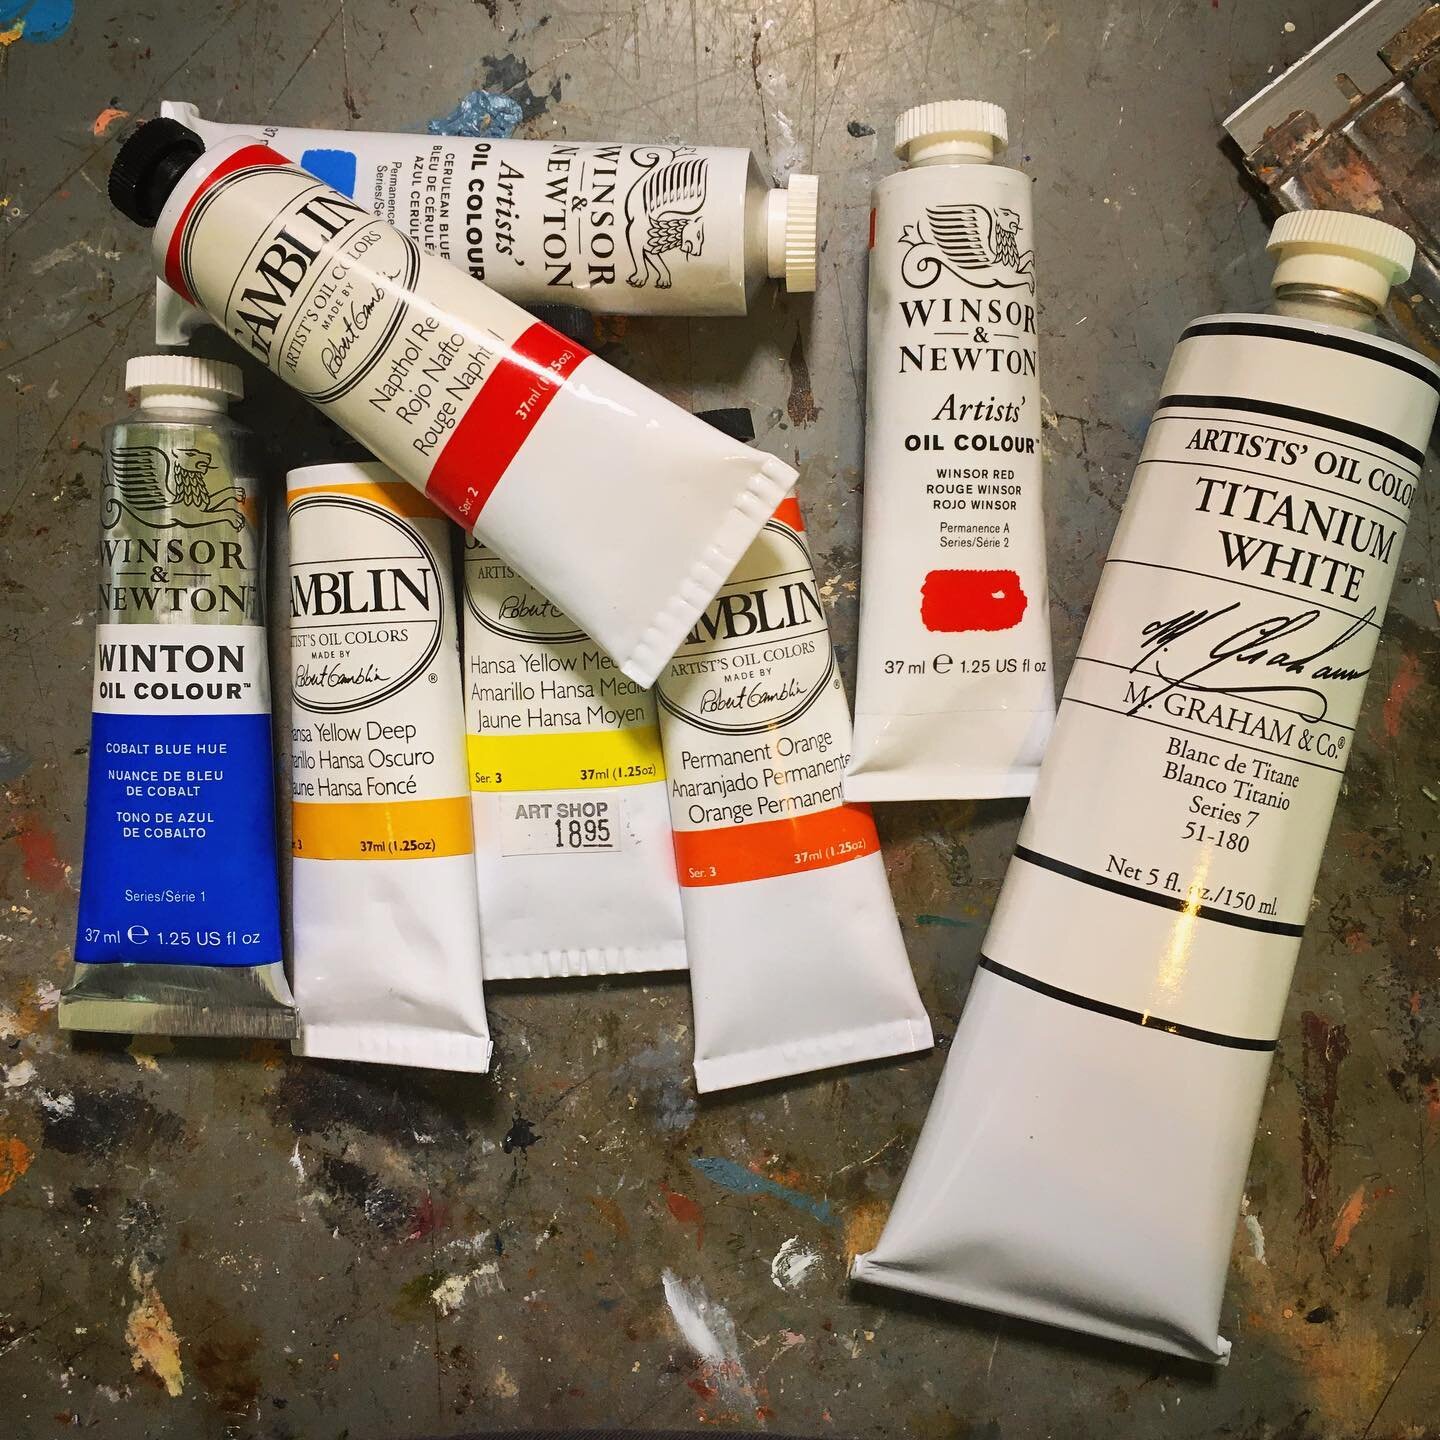 New oil paintings and sketches are coming (finally!) thx to these metal-free colors ❤️🧡💛💙🤍
.
#safetyfirst #pregnancy #painting #allaprima #fineart #oils #oilonpaper #oiloncanvas #oilpaint #oilpainting #oilsketch #figurativepainting #figurativeart